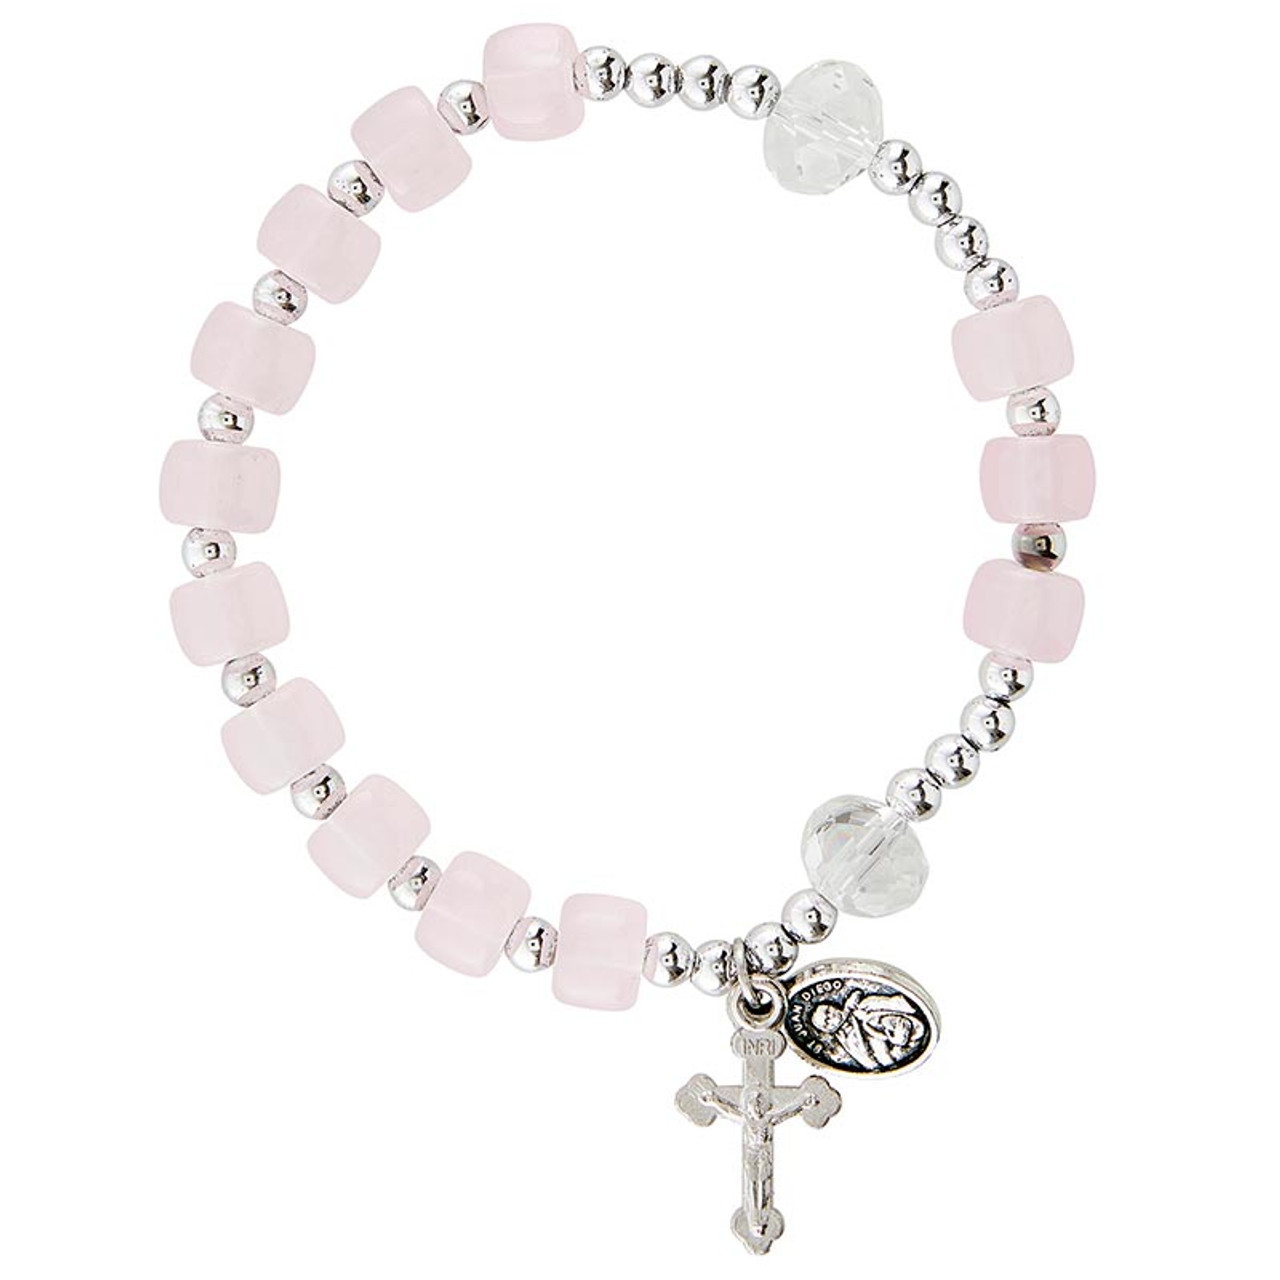 Pink Our Lady of Guadalupe Rosary Bracelet - 8/pk - [Consumer]Autom